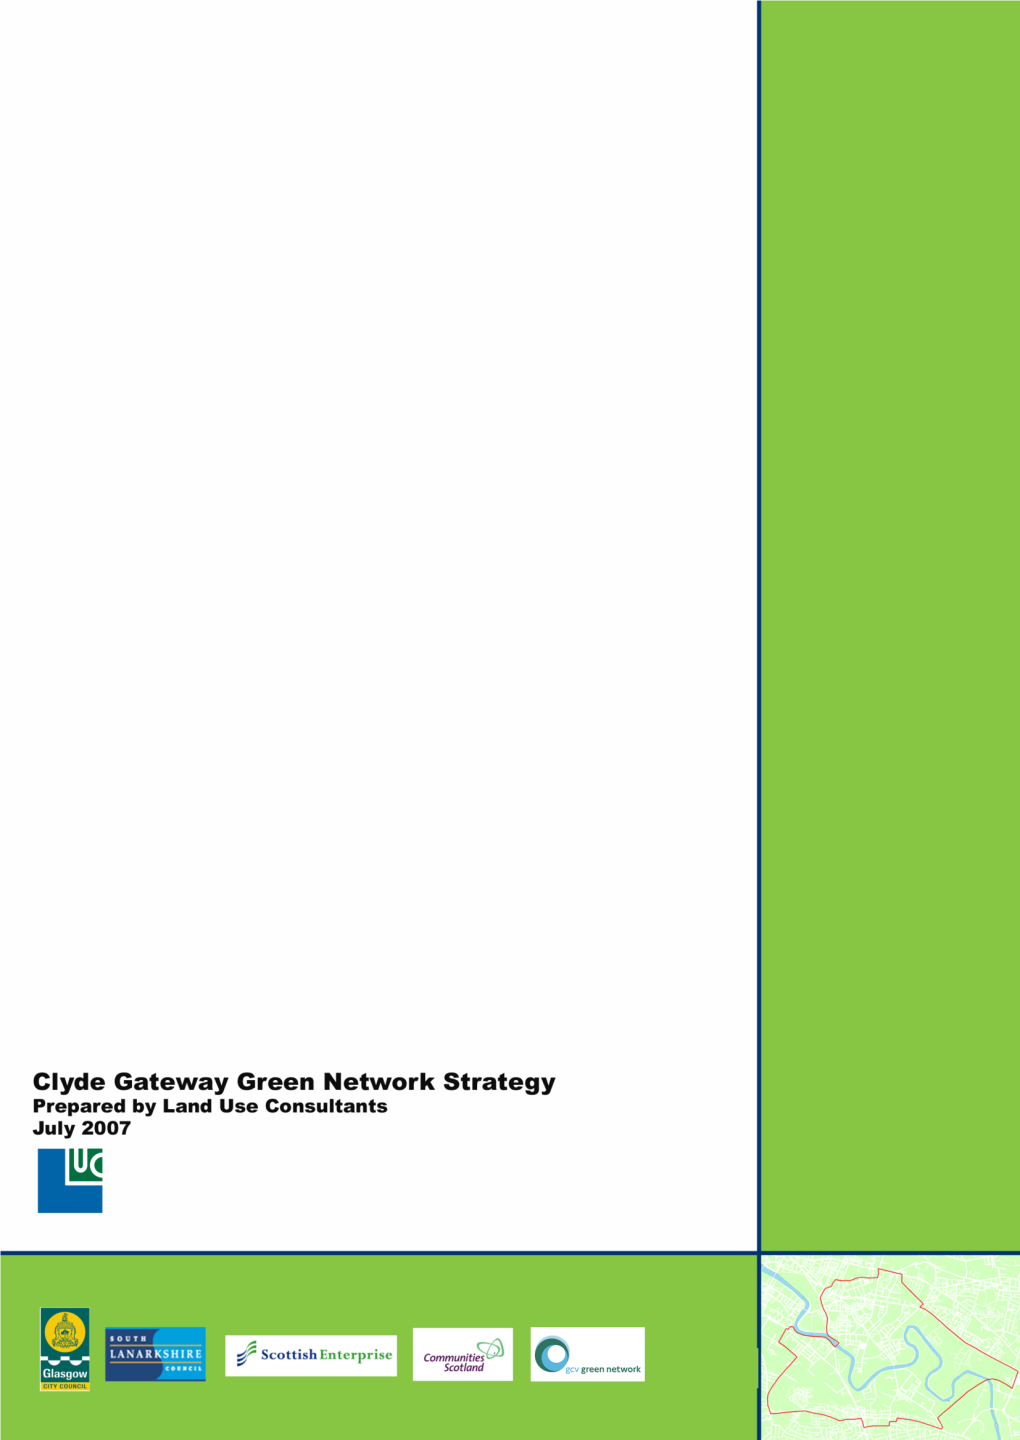 Clyde Gateway Green Network Strategy Final Report Prepared For